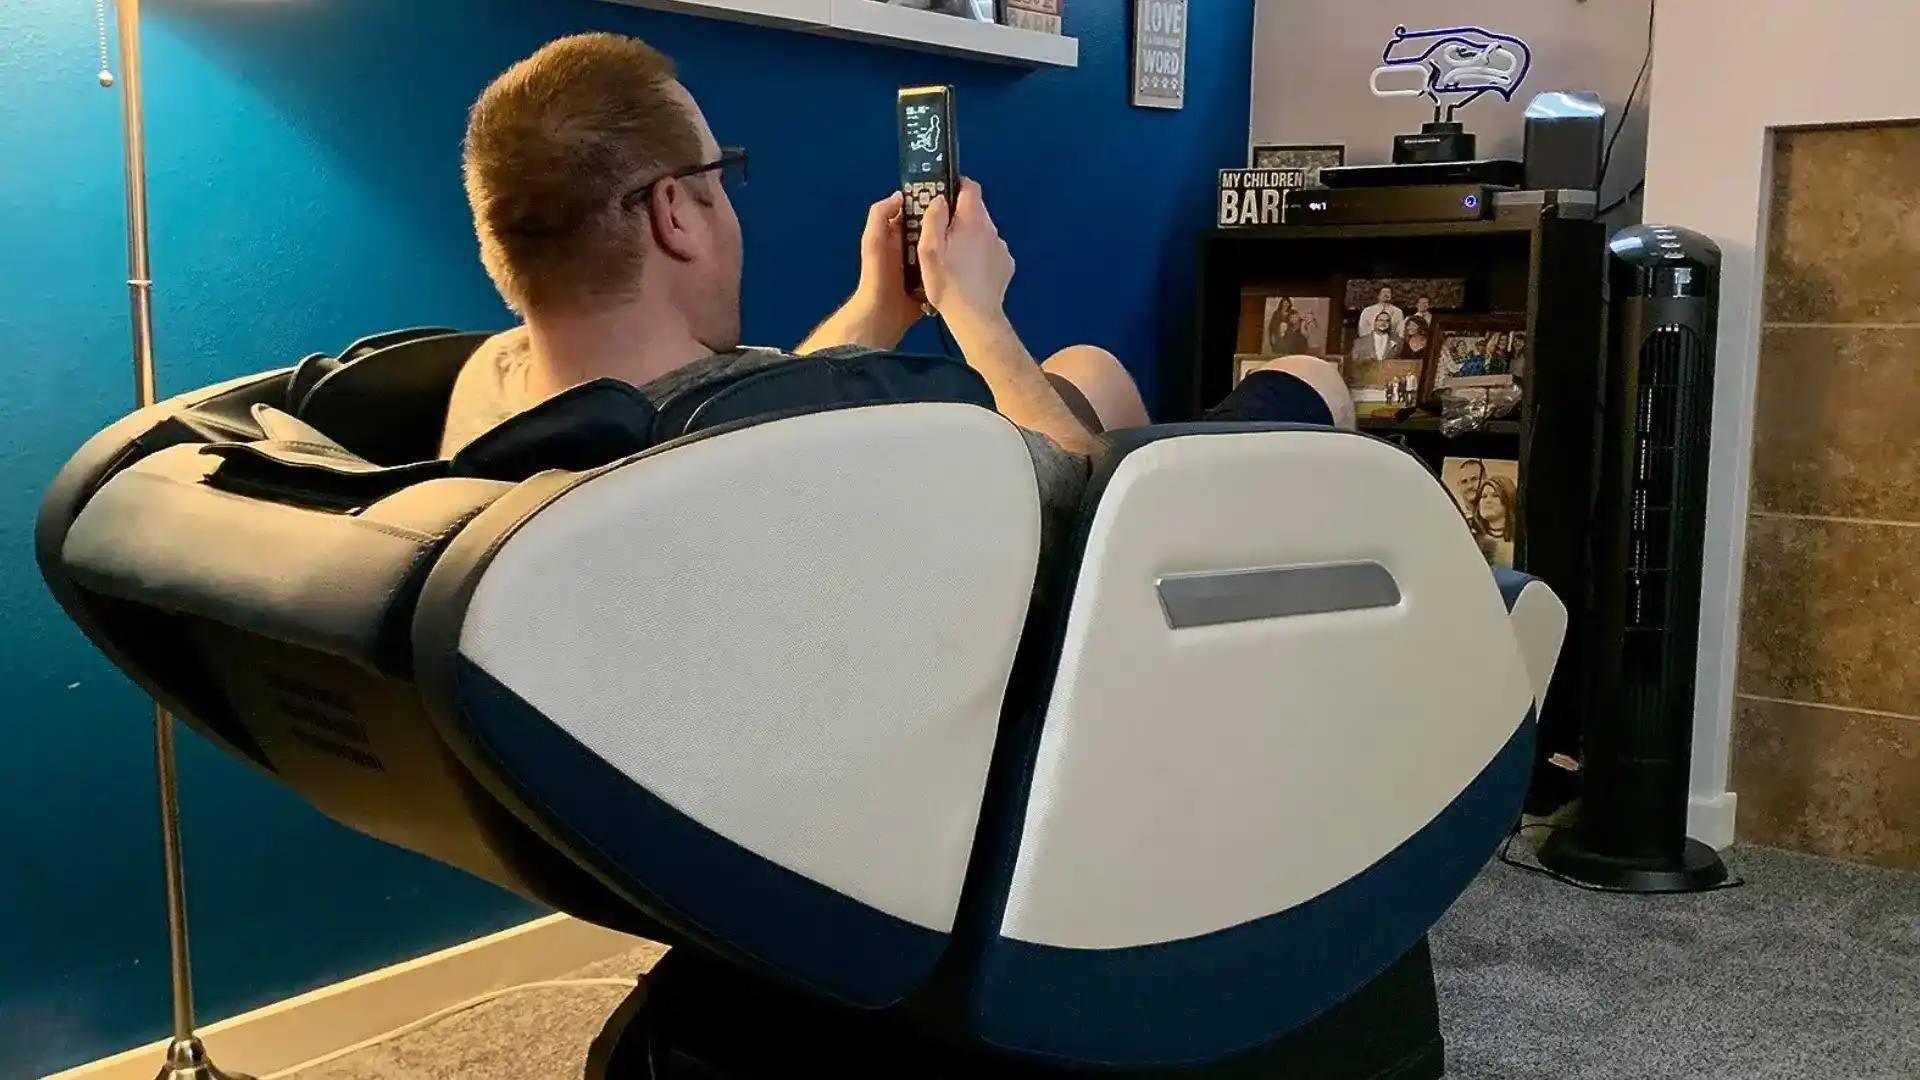 SMAGREHO Massage Chair